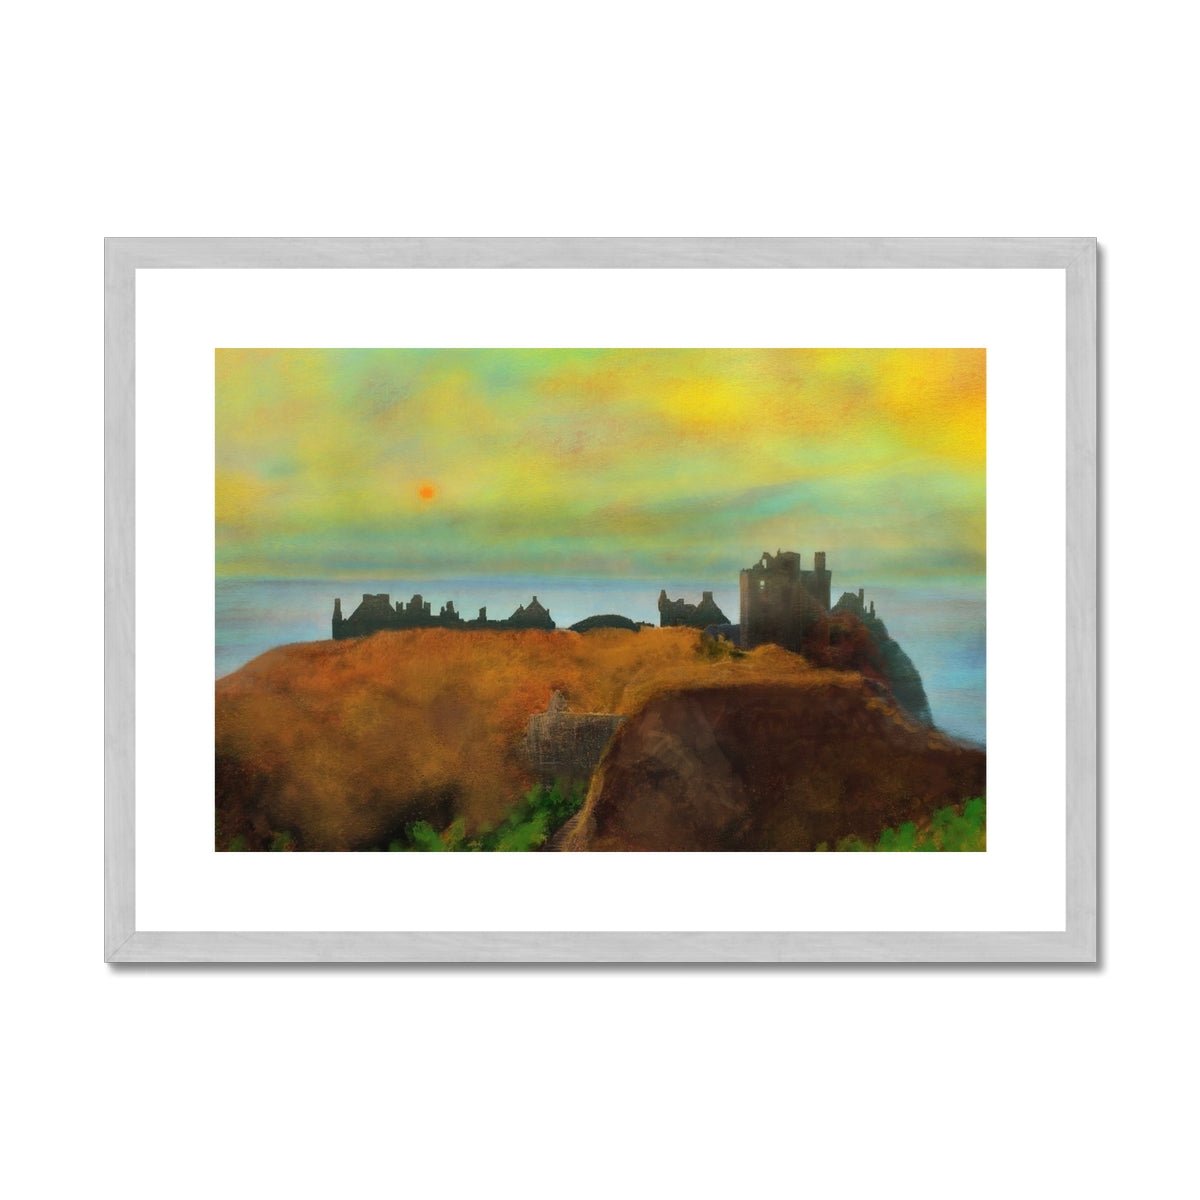 Dunnottar Castle Dusk Painting | Antique Framed & Mounted Prints From Scotland-Antique Framed & Mounted Prints-Historic & Iconic Scotland Art Gallery-A2 Landscape-Silver Frame-Paintings, Prints, Homeware, Art Gifts From Scotland By Scottish Artist Kevin Hunter